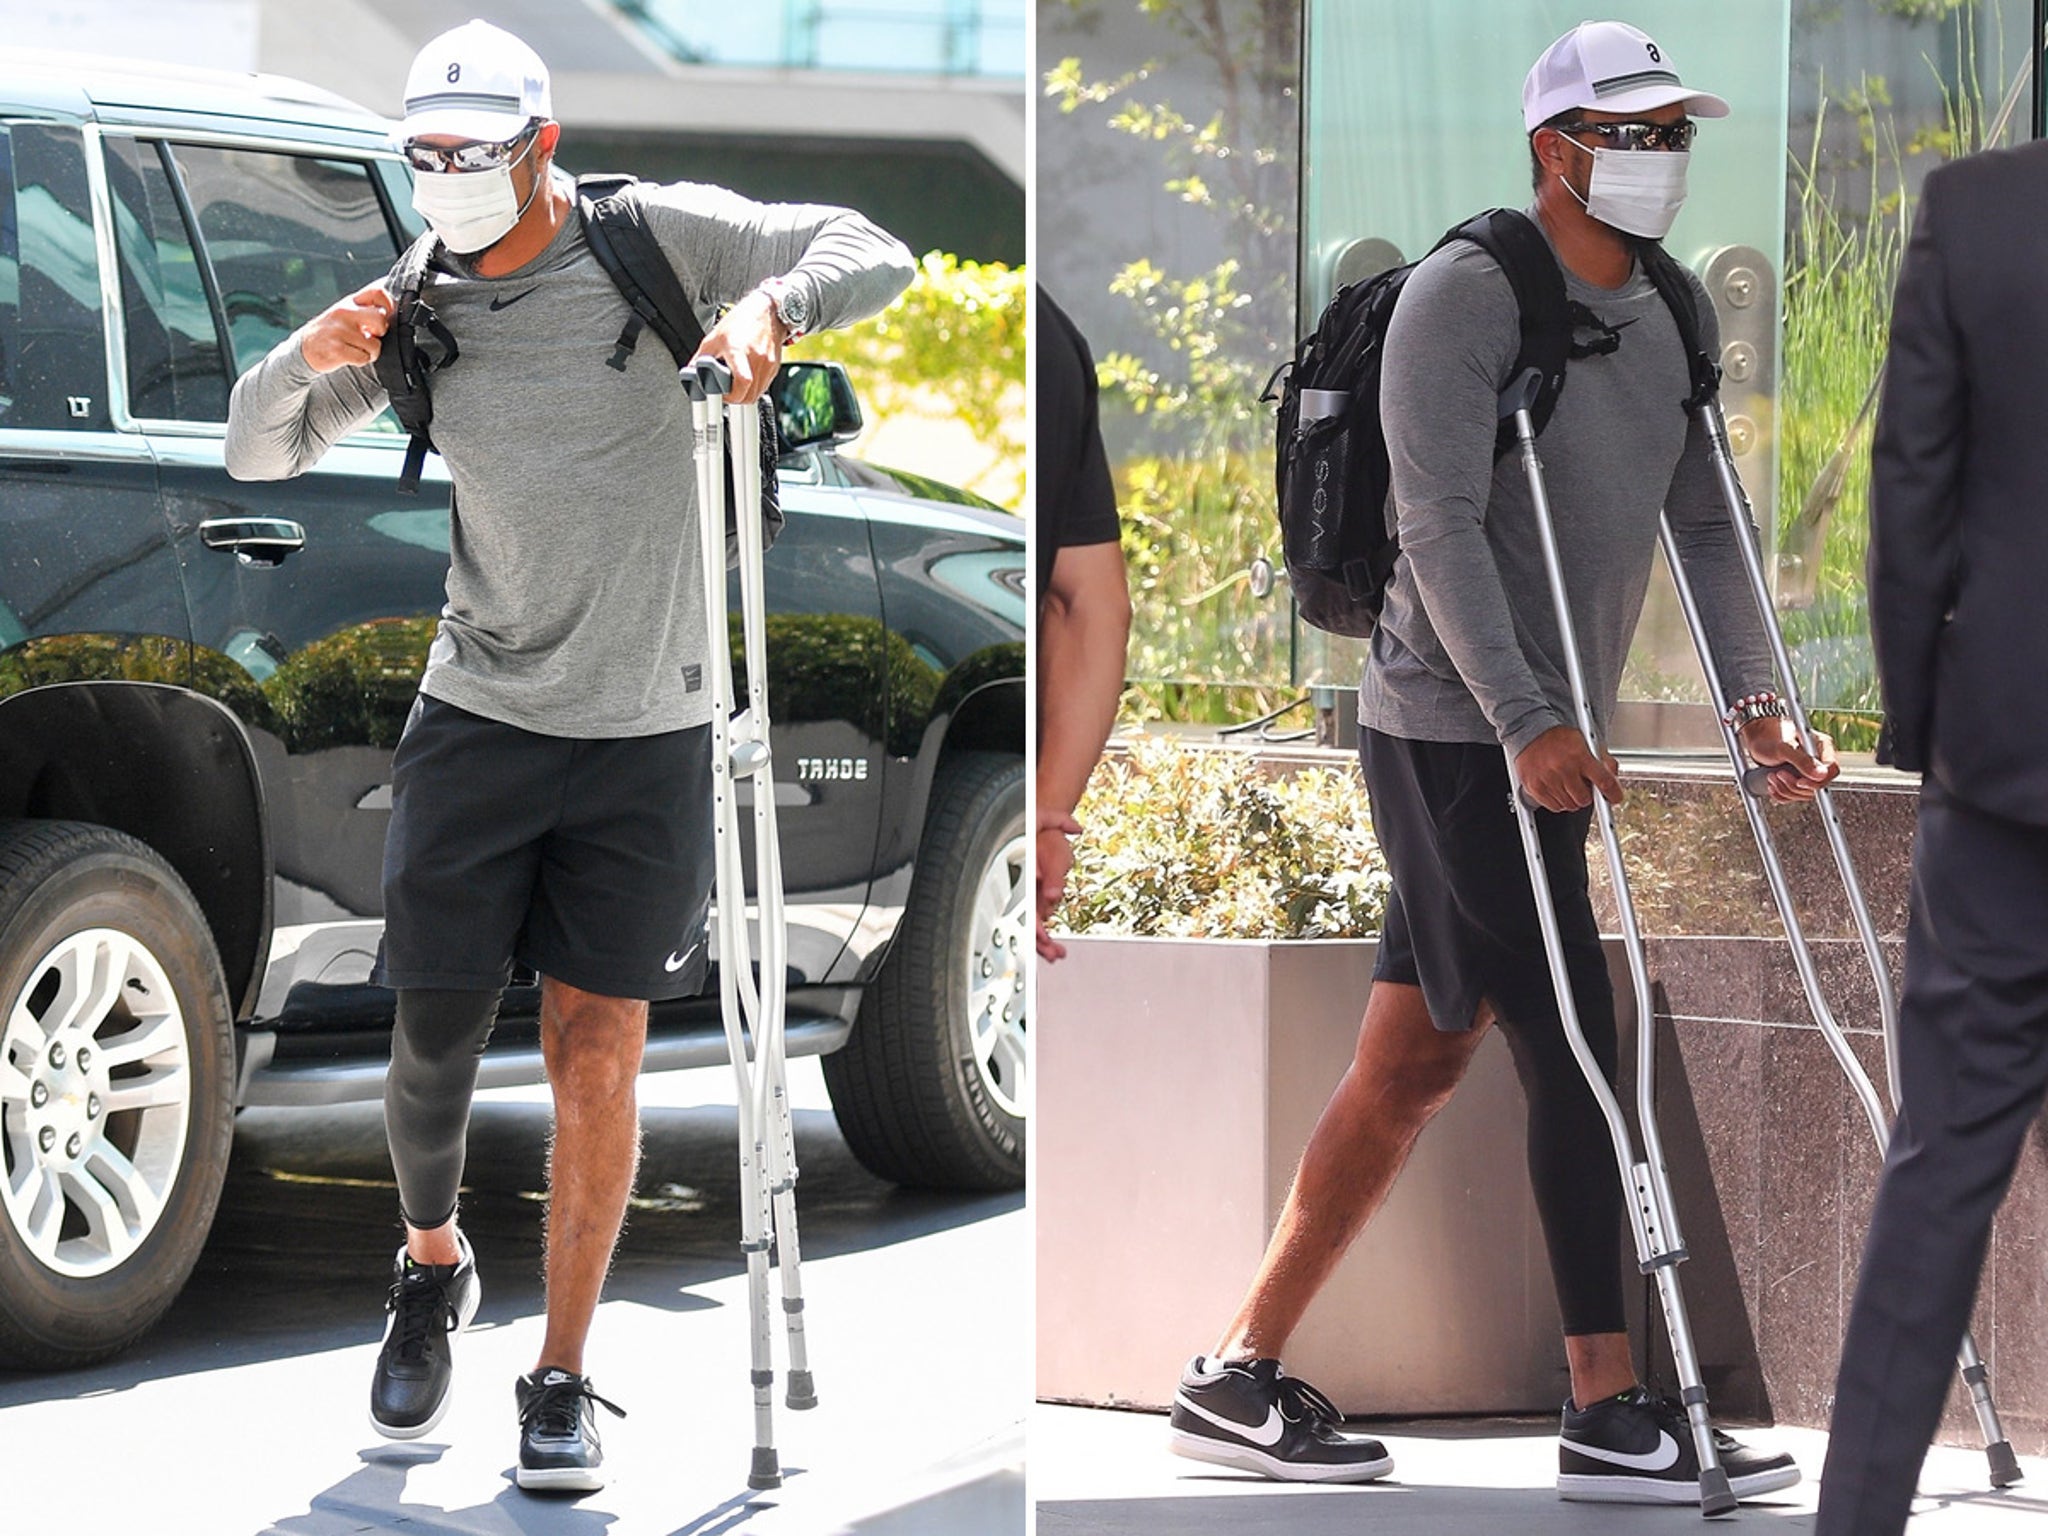 Tiger Woods Puts Weight On Surgically Repaired Leg During Trip To L.A. - W1